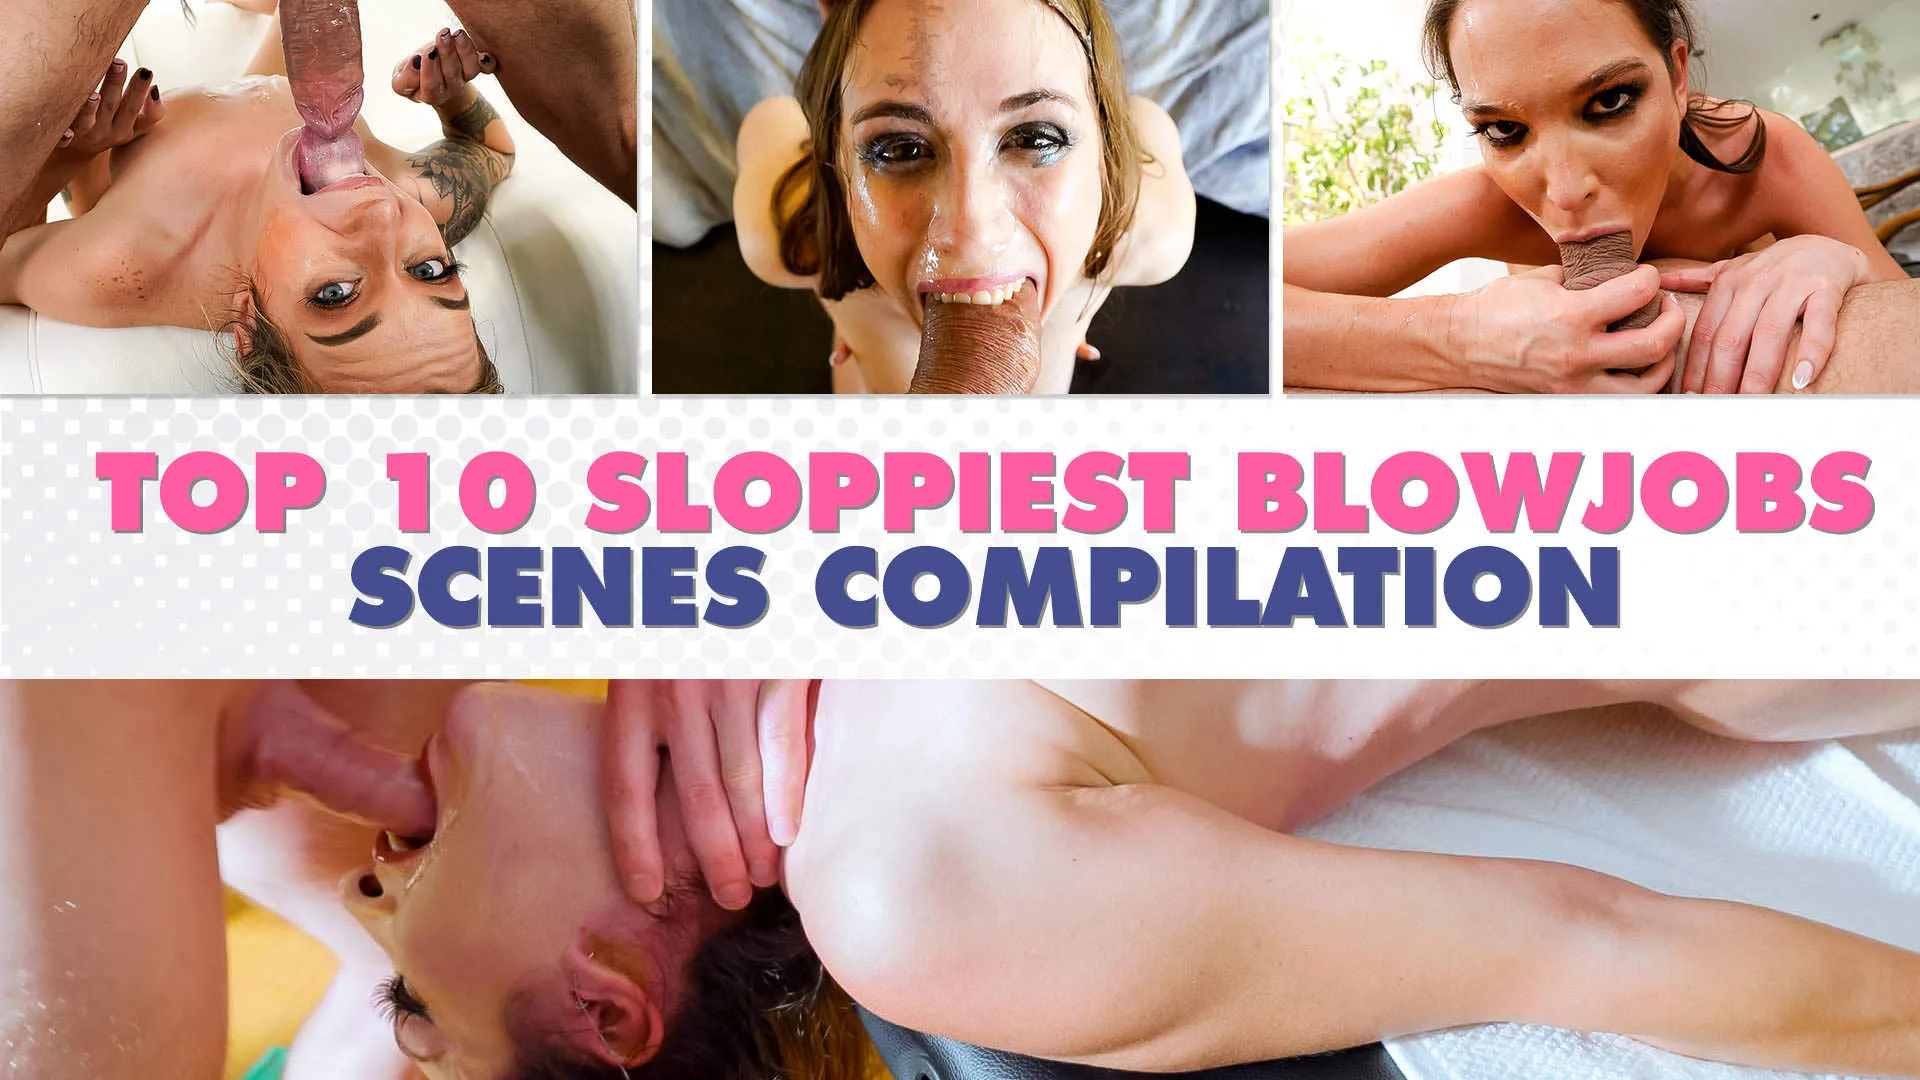 Top 10 Sloppiest Blowjobs - Only Teen Blowjobs